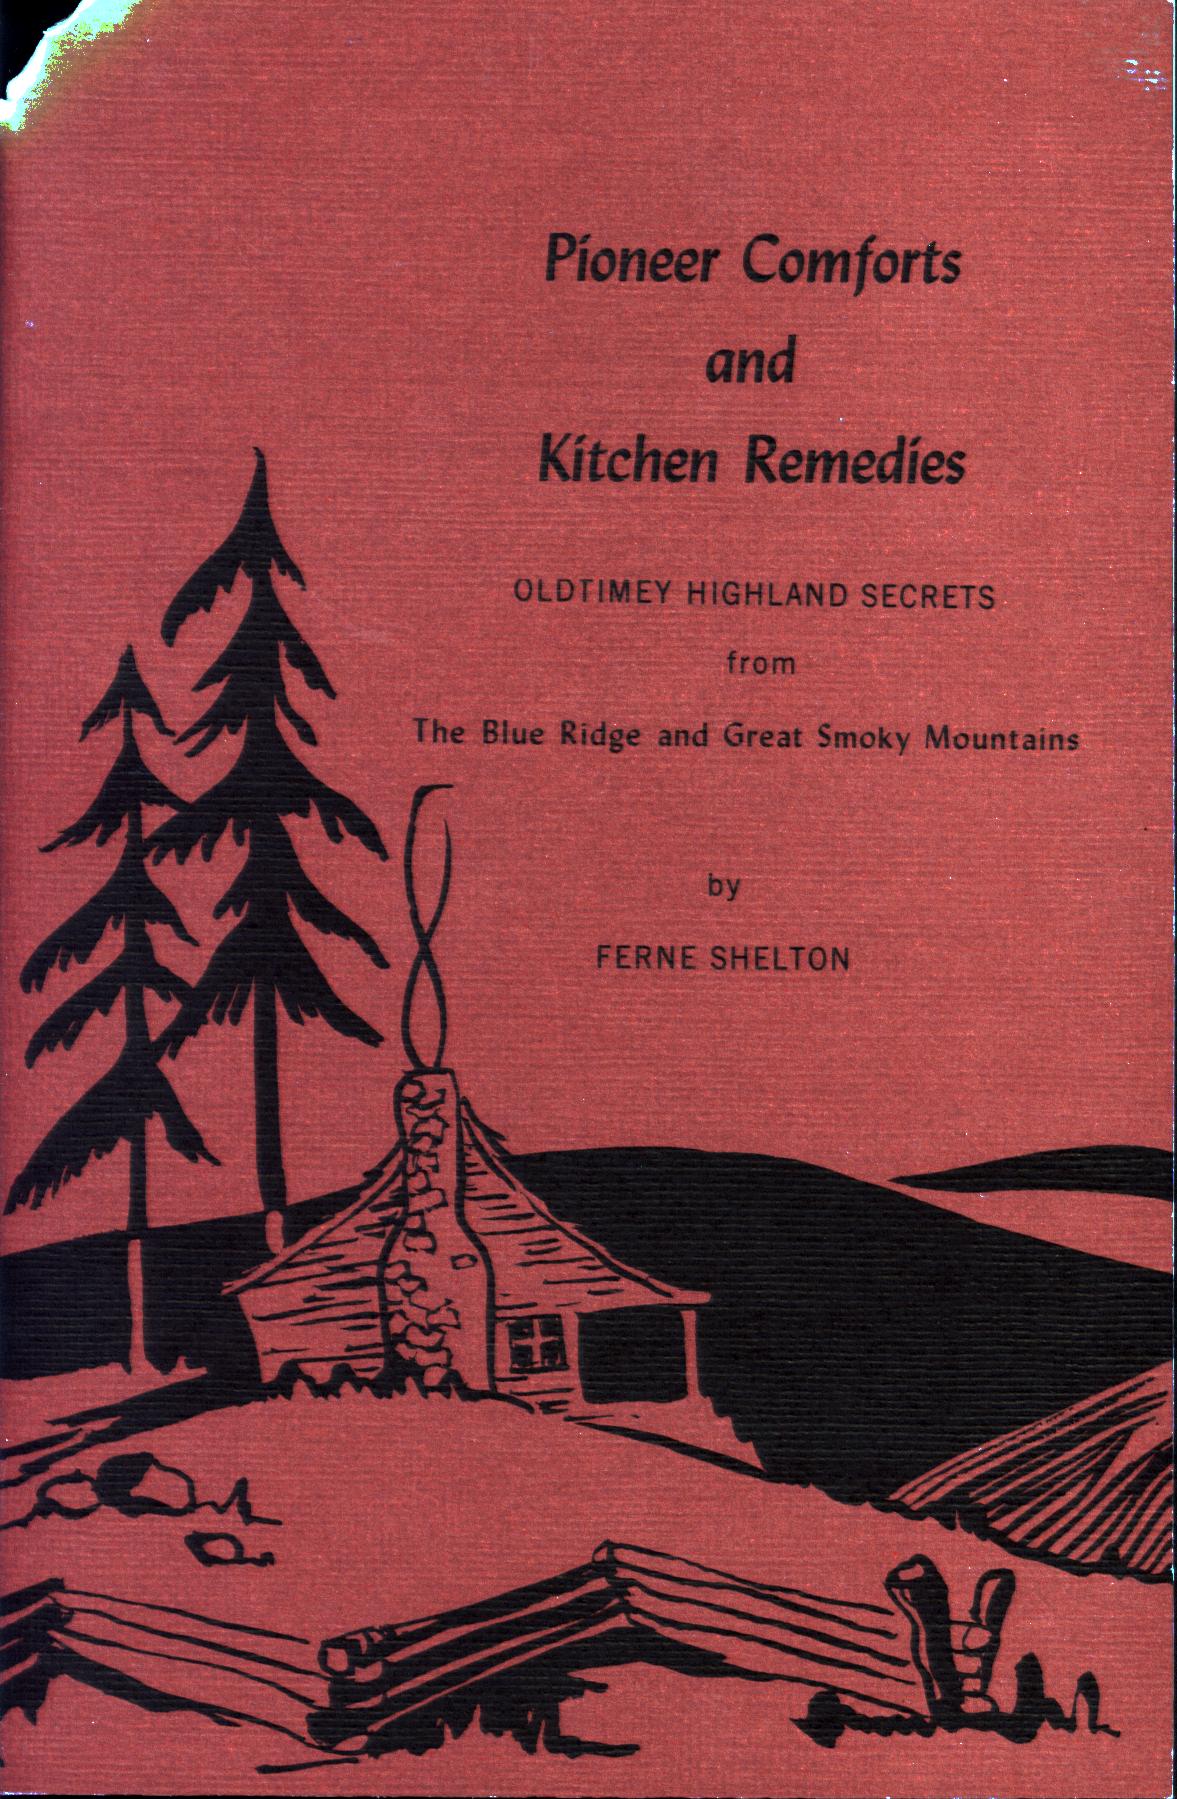 PIONEER COMFORTS AND KITCHEN REMEDIES: old-timey highland secrets from the Blue Ridge and Great Smoky Mountains. 